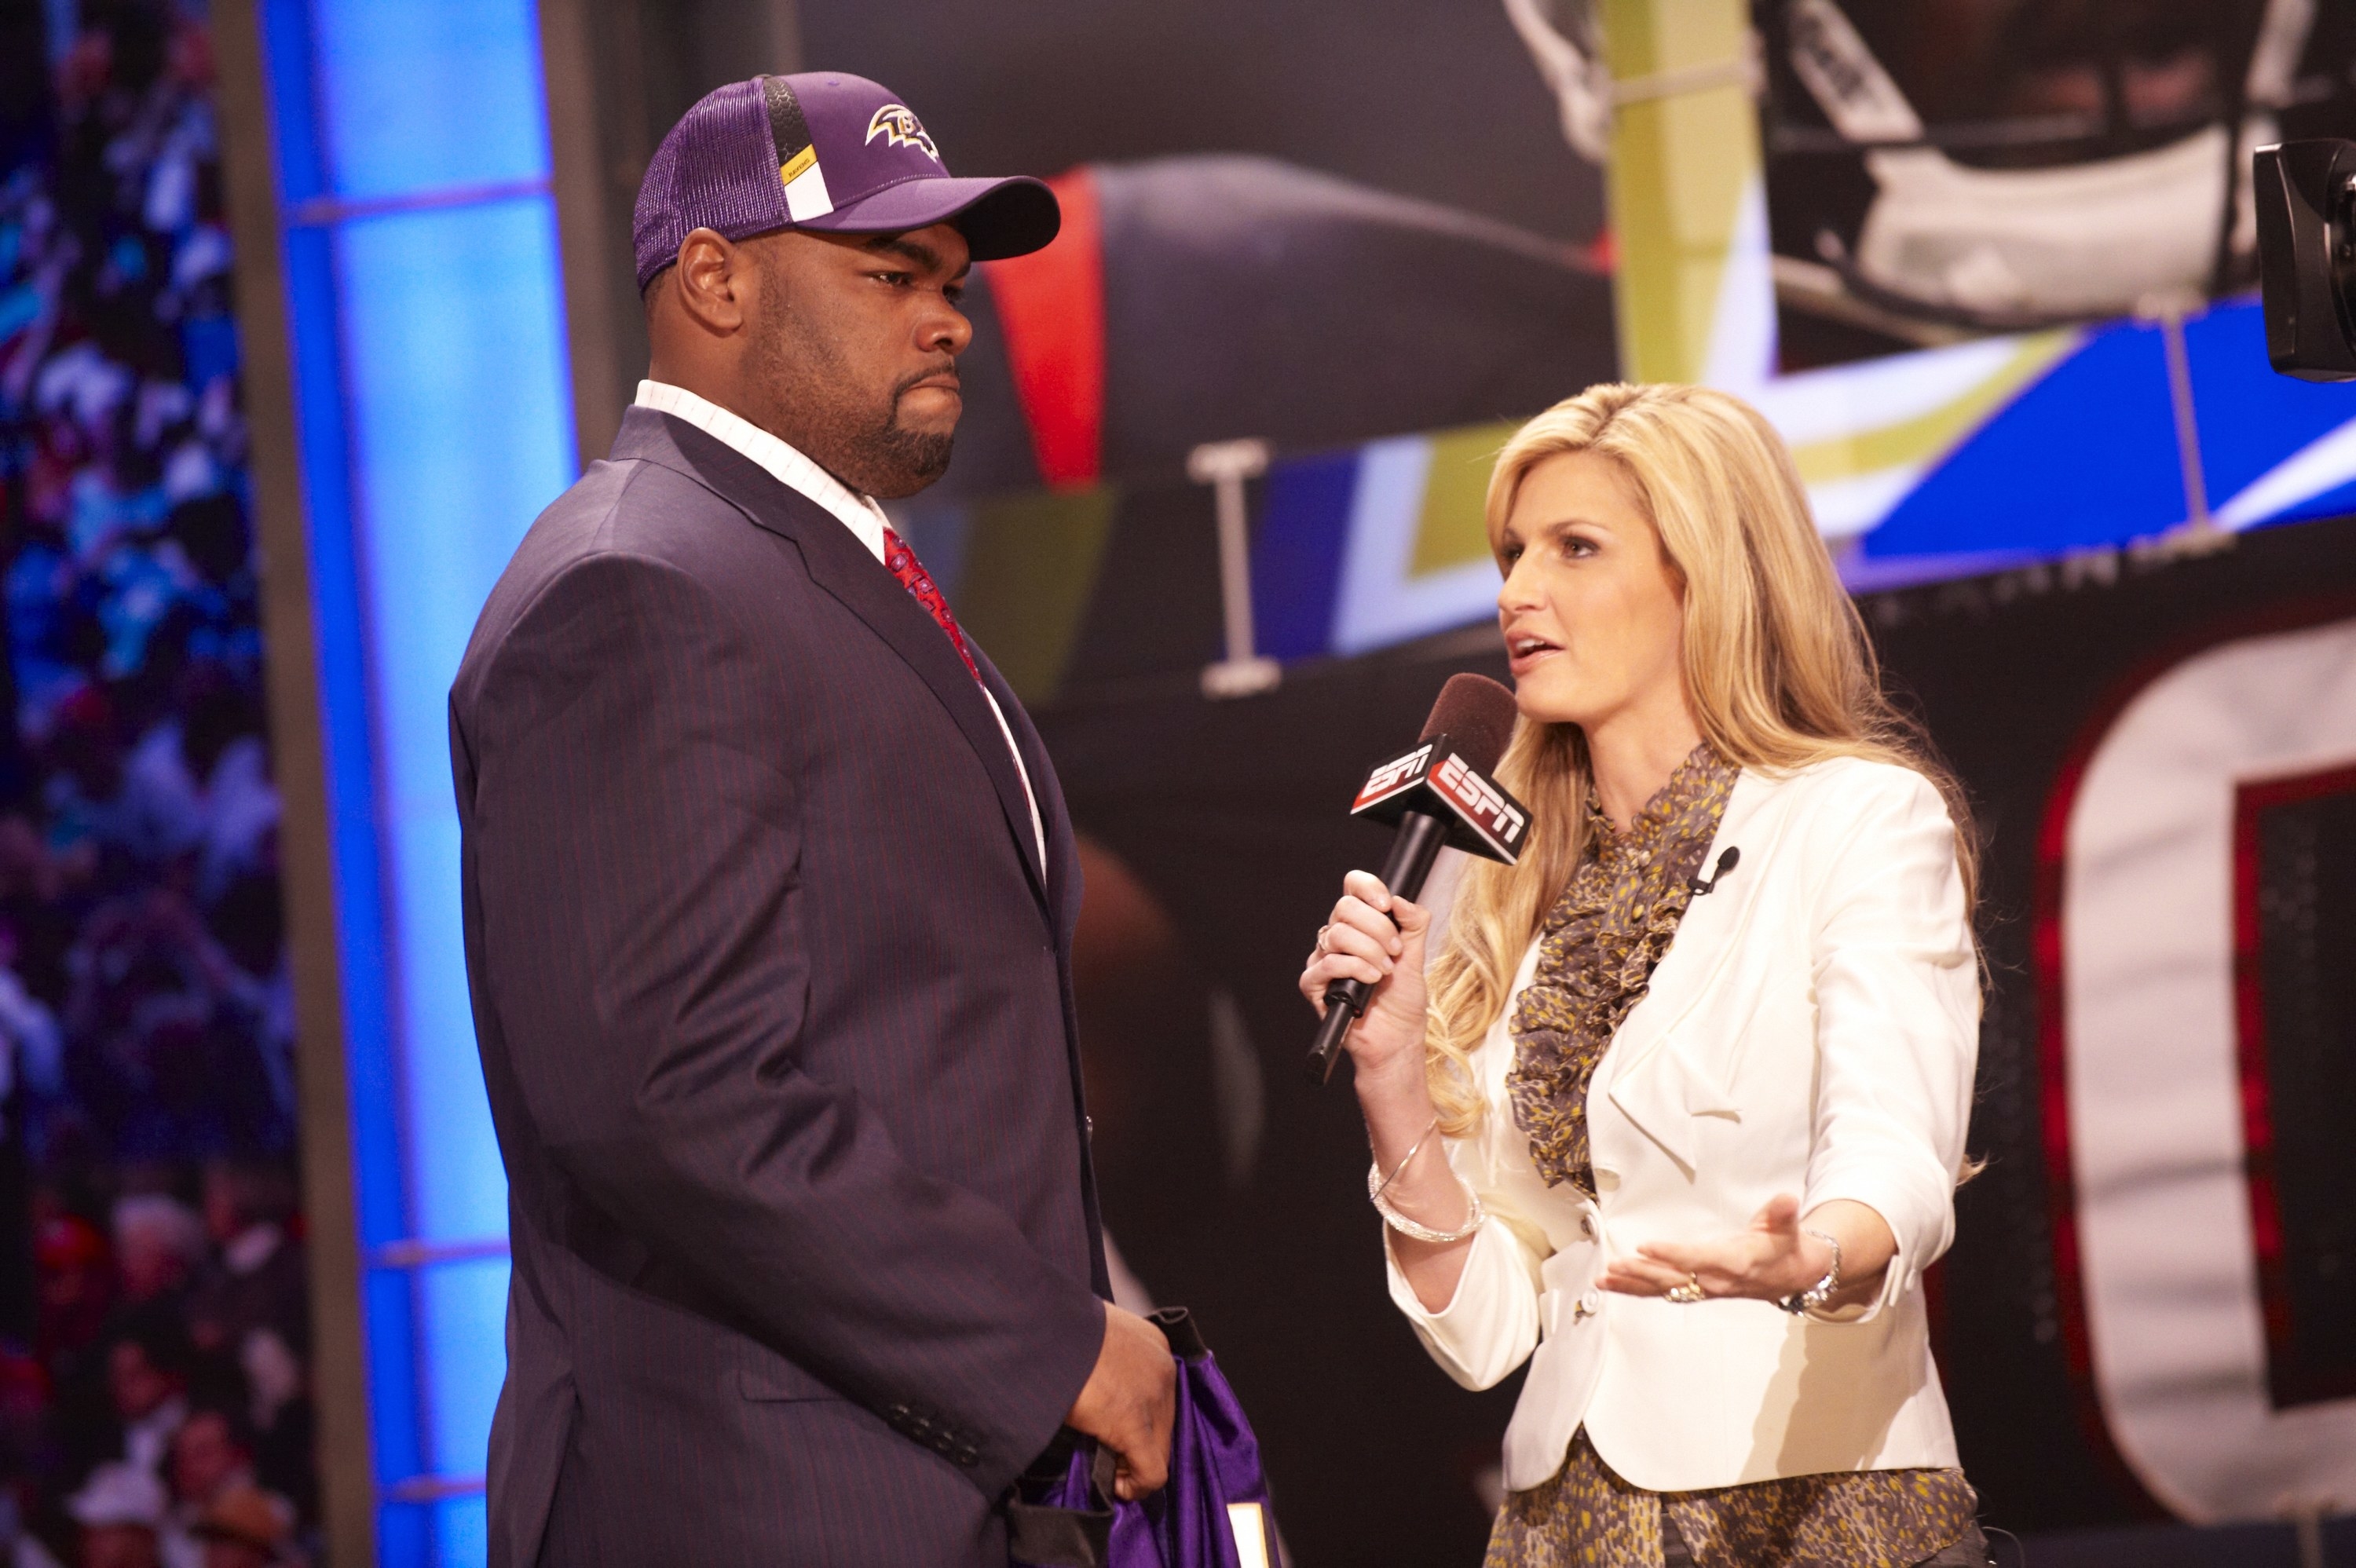 Michael Oher onstage with ESPN announcer Erin Andrews during media interview at Radio City Music Hall